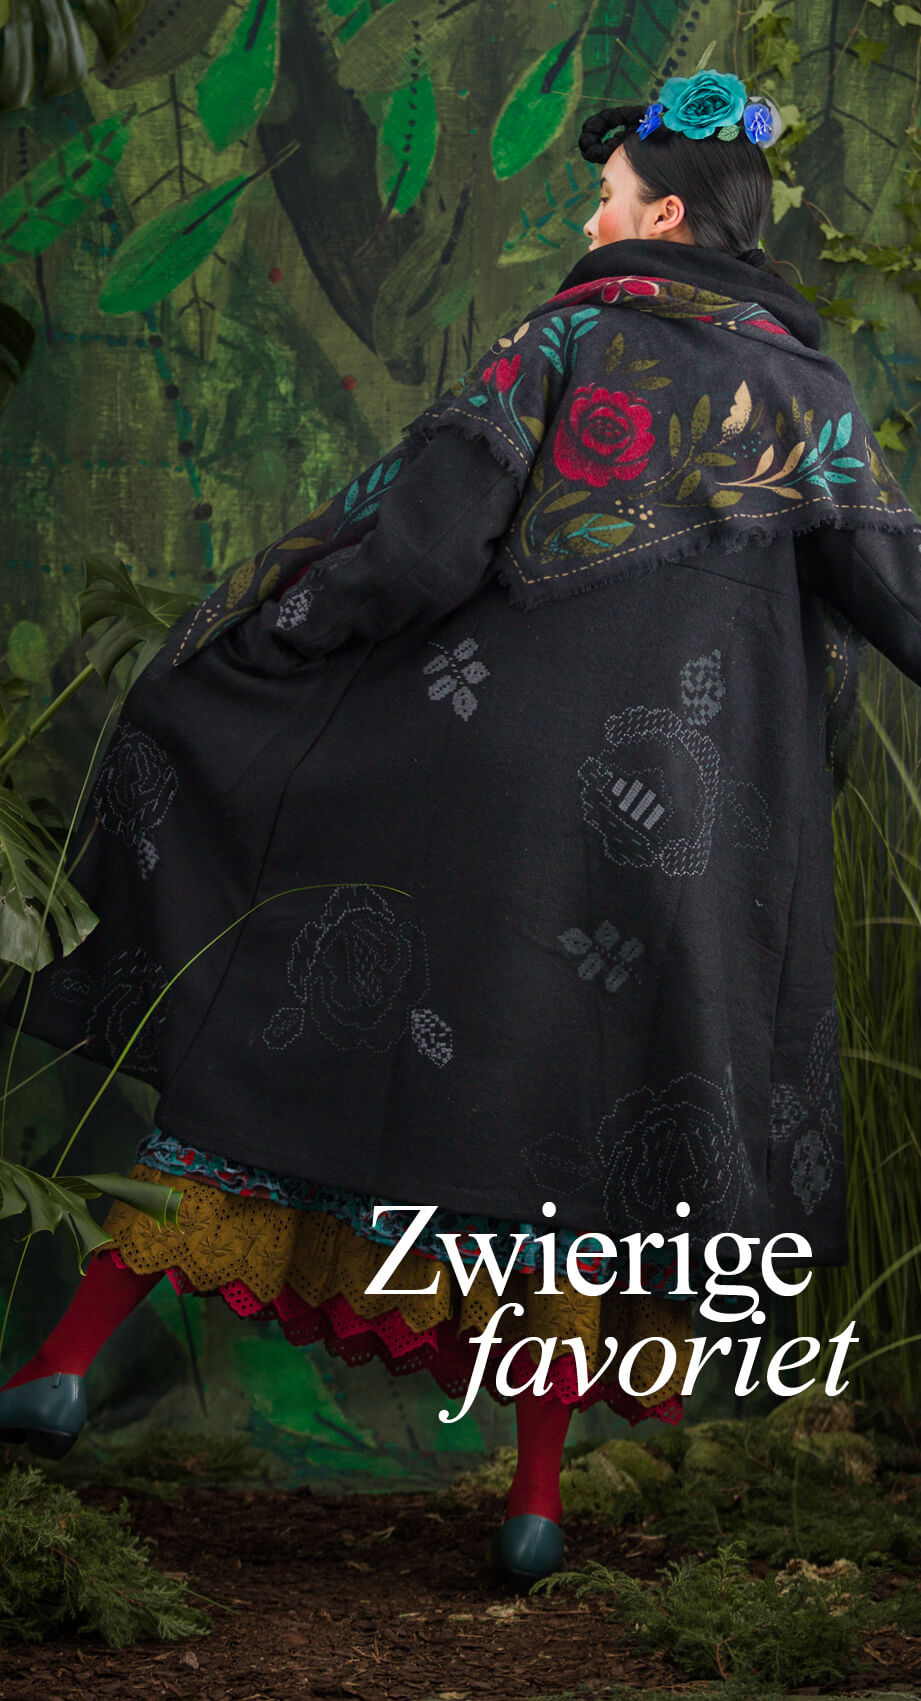 Large embroidered roses with a graphic look adorn this finely crafted coat. 